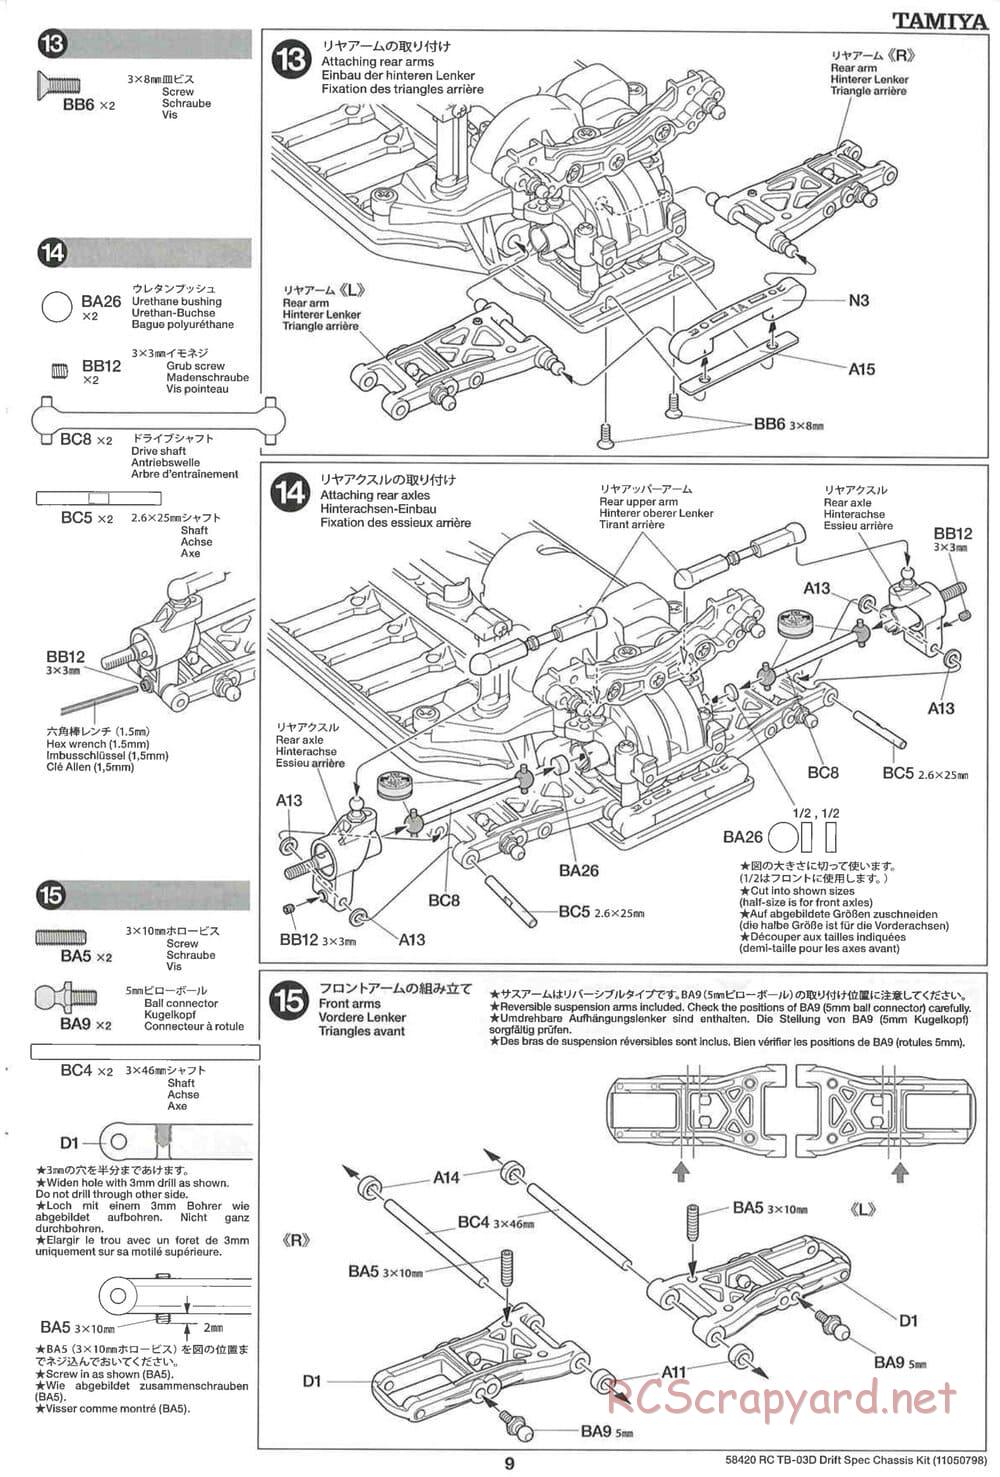 Tamiya - TB-03D HP Drift Spec Chassis - Manual - Page 9